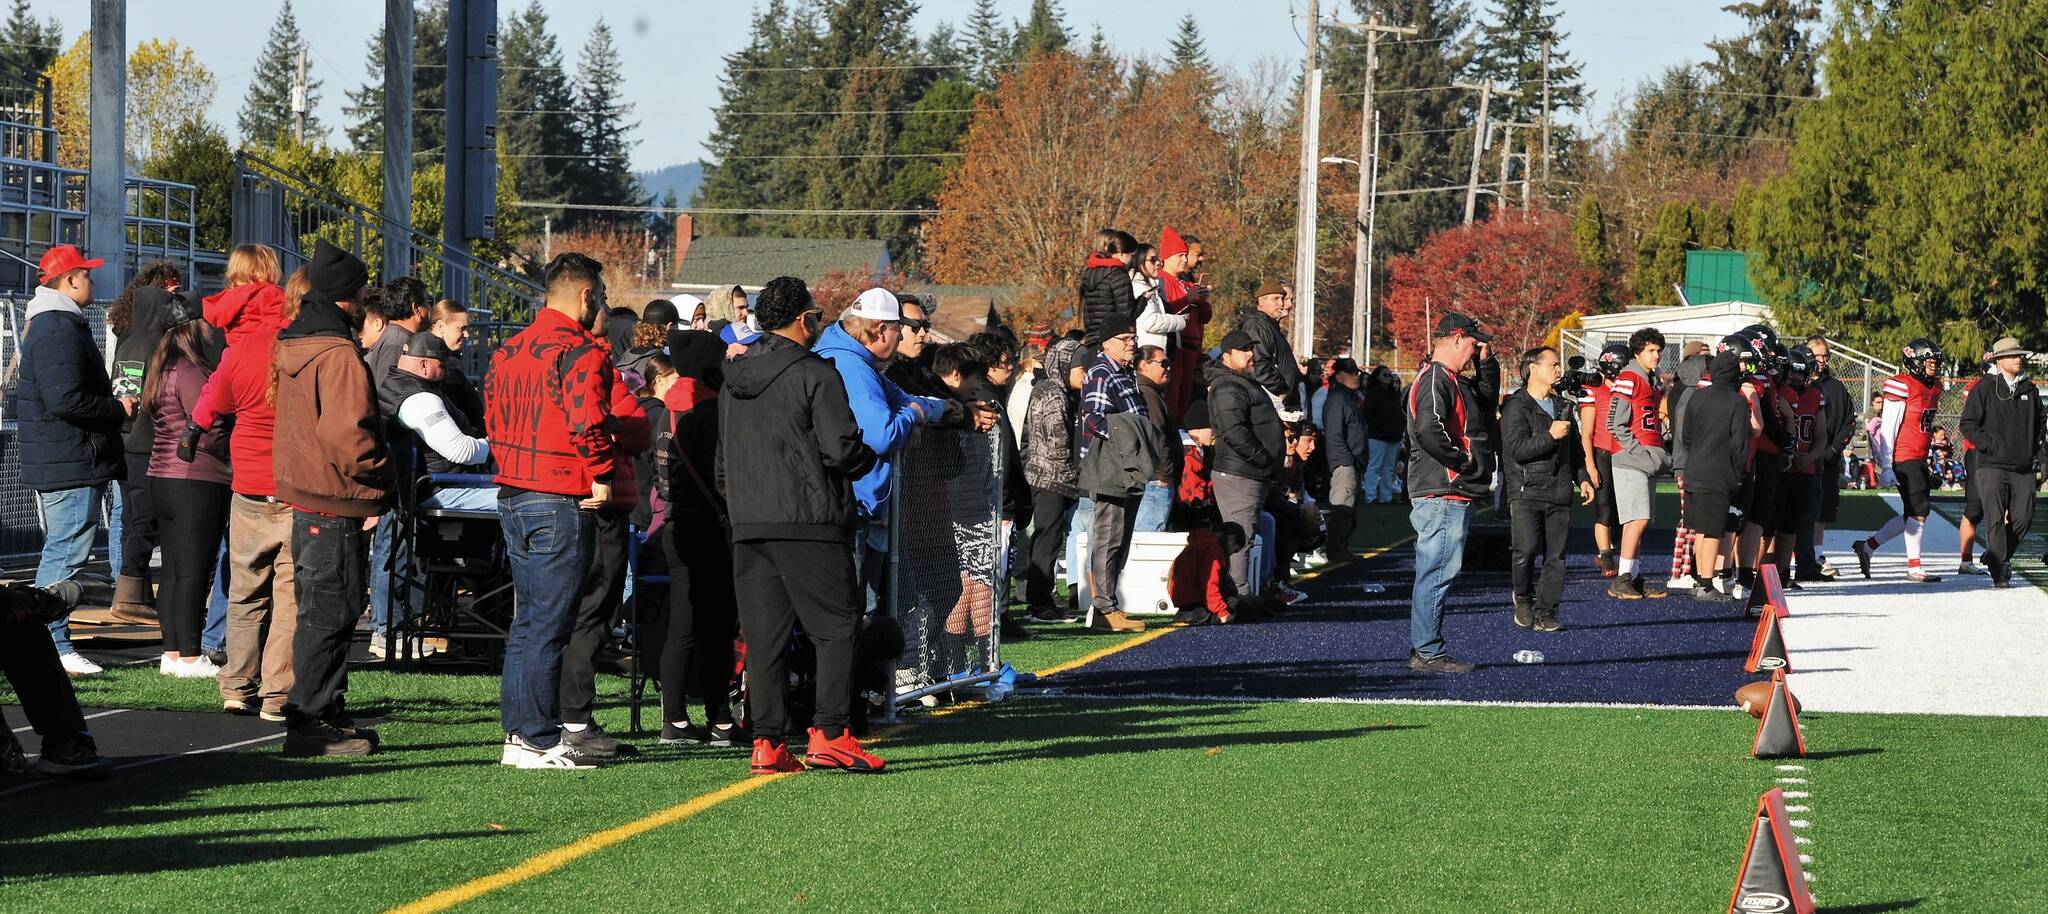 Just a portion of the large gathering of Red Devil fans who gathered at Spartan Stadium in Forks for the Neah Bay vs Wellpinit state playoff game played November 19. There will no doubt be a large group of fans making the trip to Tacoma for the State 1B championship game as Neah Bay will face Liberty Bell of Winthrop at noon at Mt Tahoma High School. Photo by Lonnie Archibald